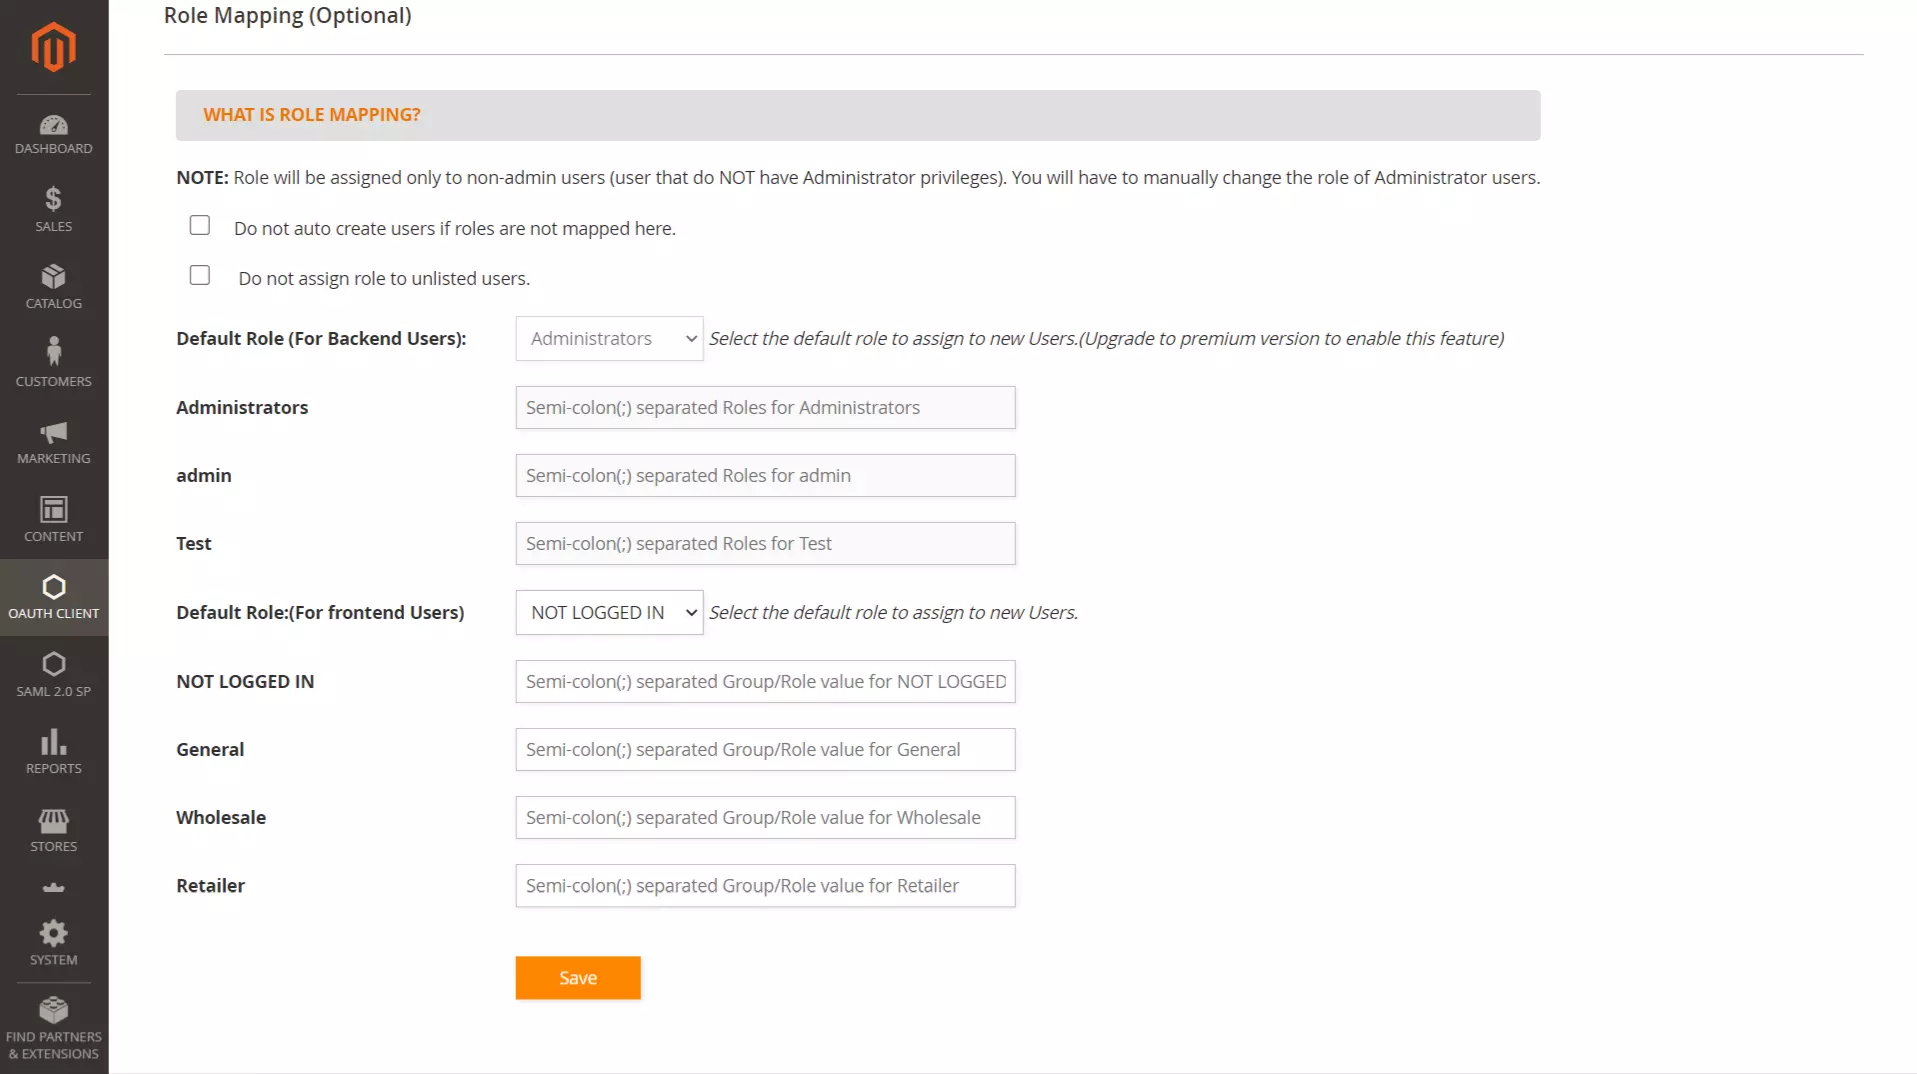 PingFederate Magento SSO - PingFederate Single Sign-On(SSO) Login in Magento - role mapping